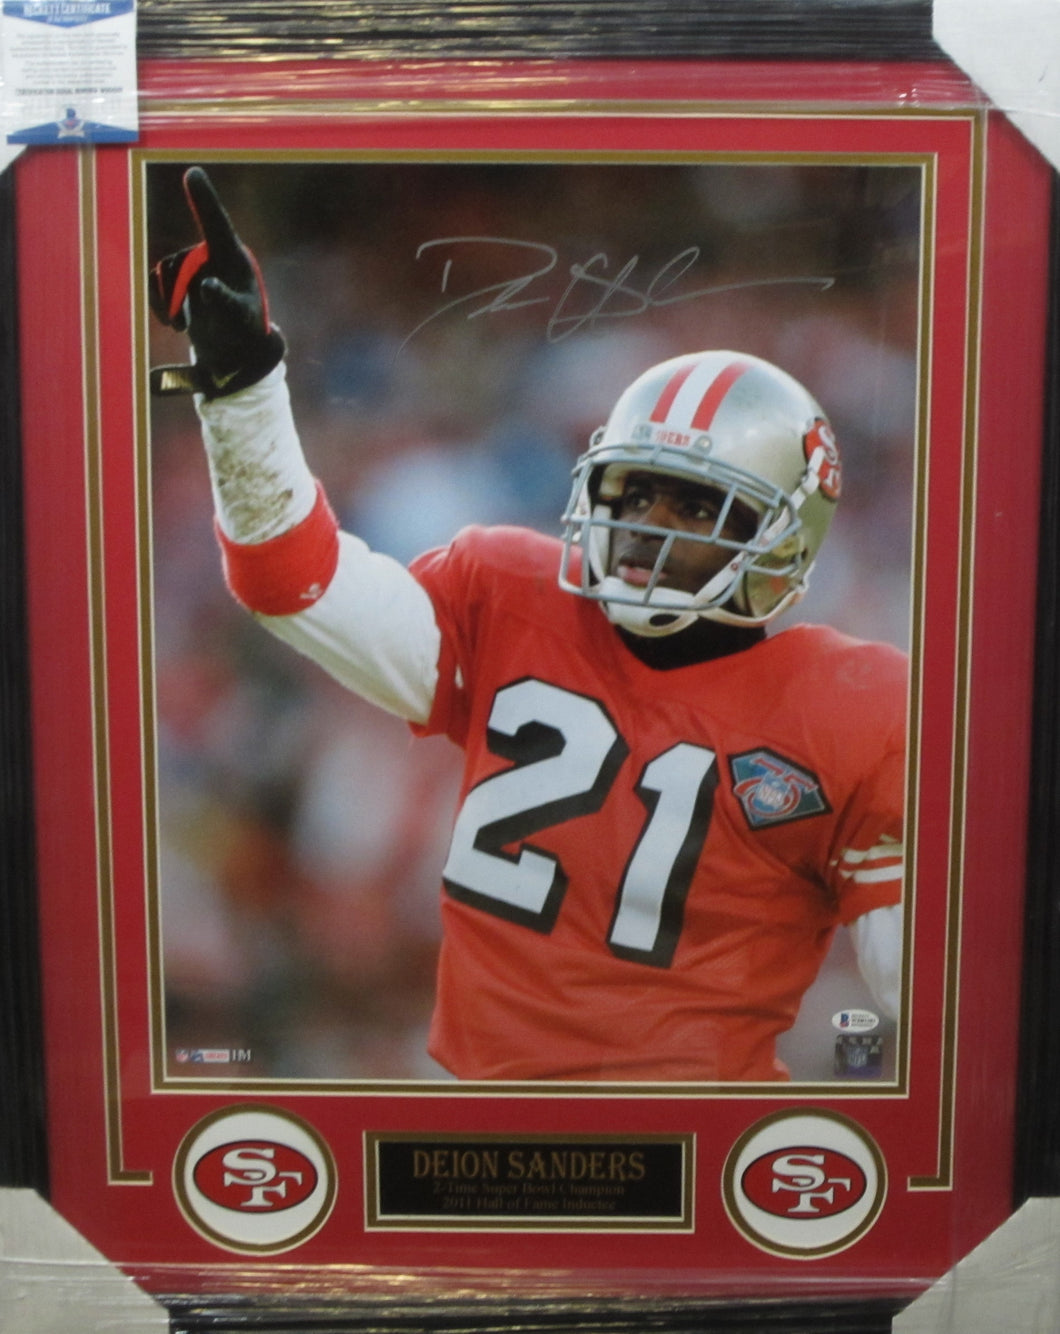 San Francisco 49ers Deion Sanders Signed 16x20 Photo Framed & Matted with BECKETT COA